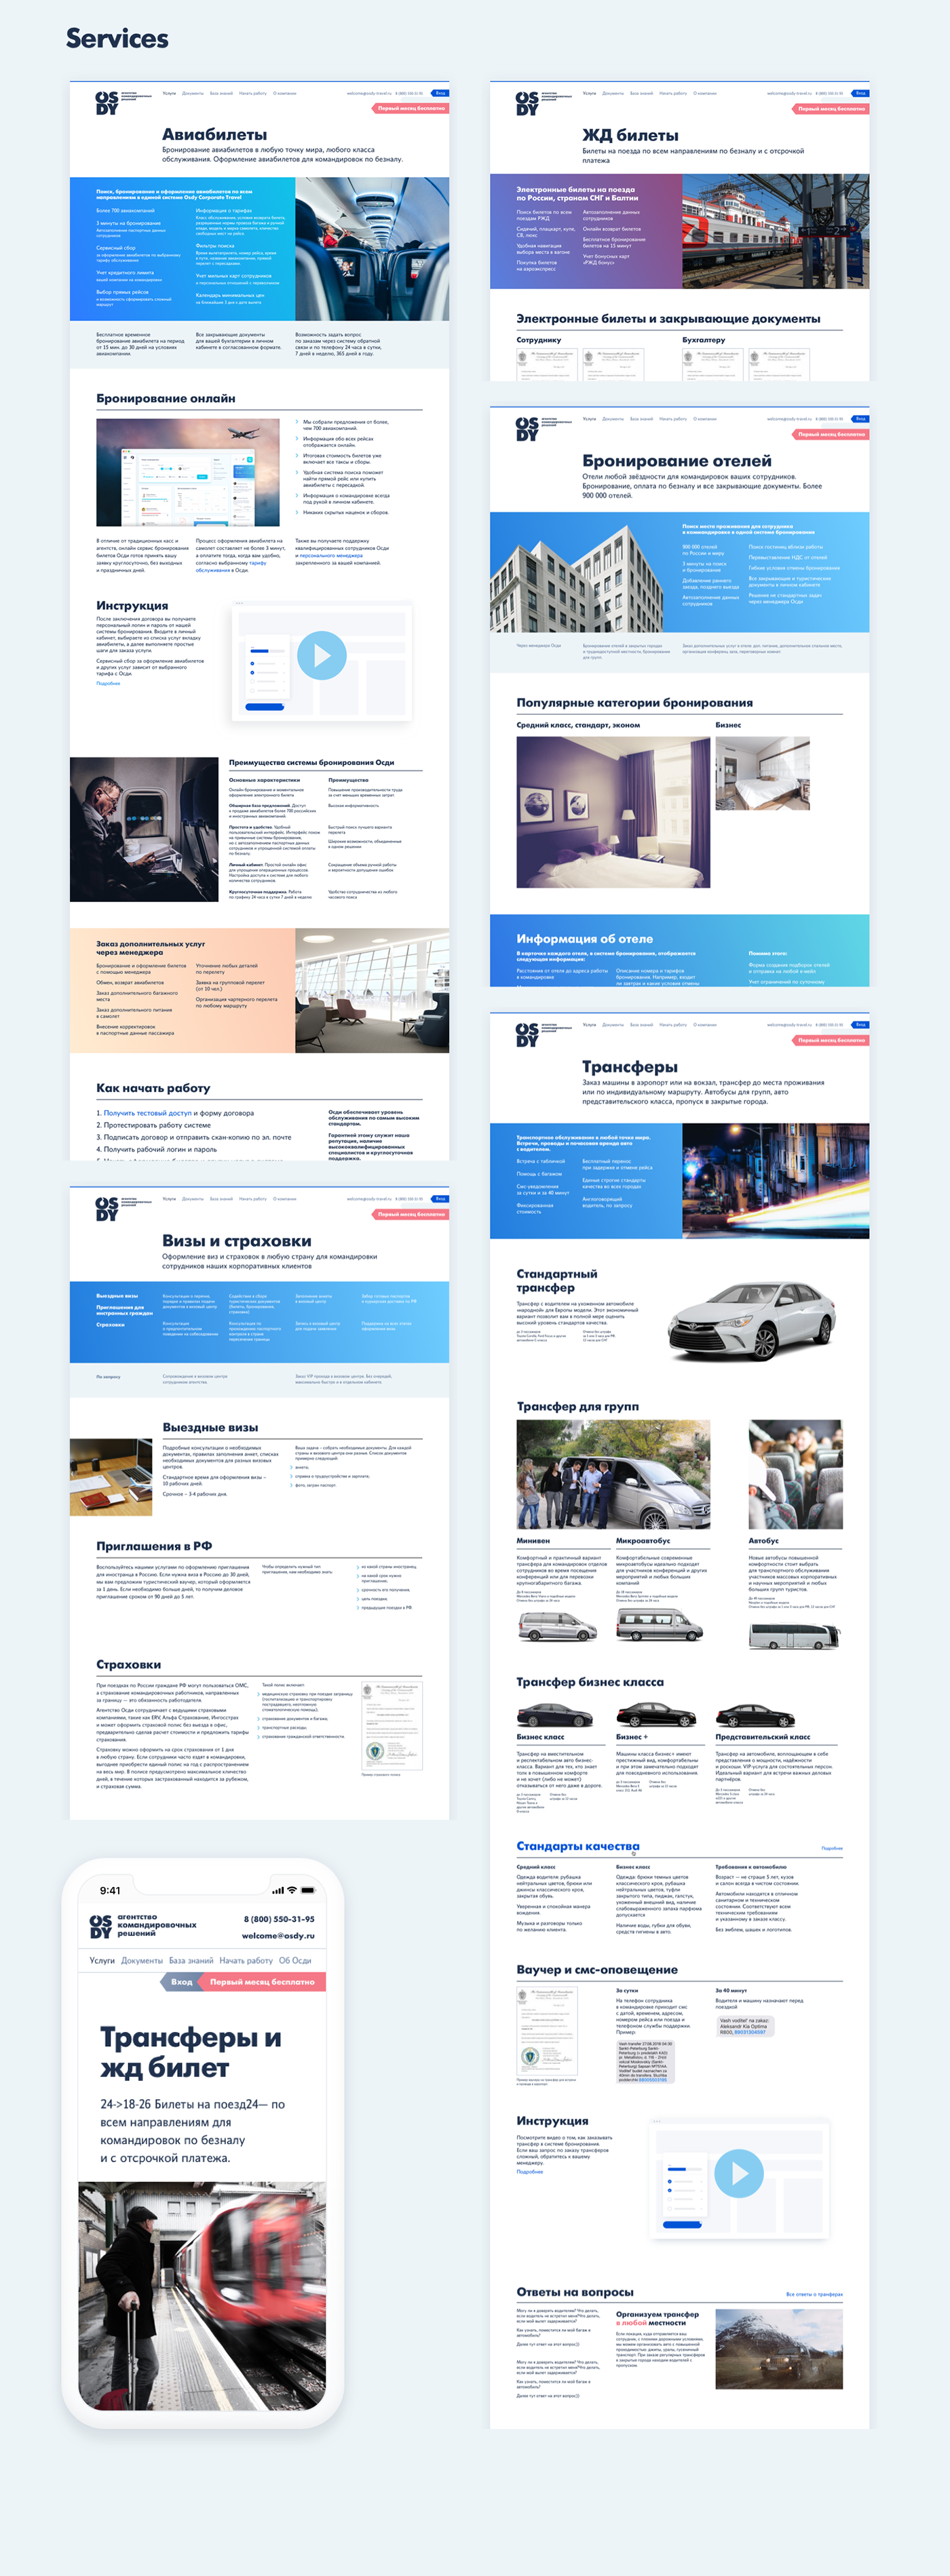 branding  business travel osdy Webdesign personas Drafts deck package design  research ghost blog